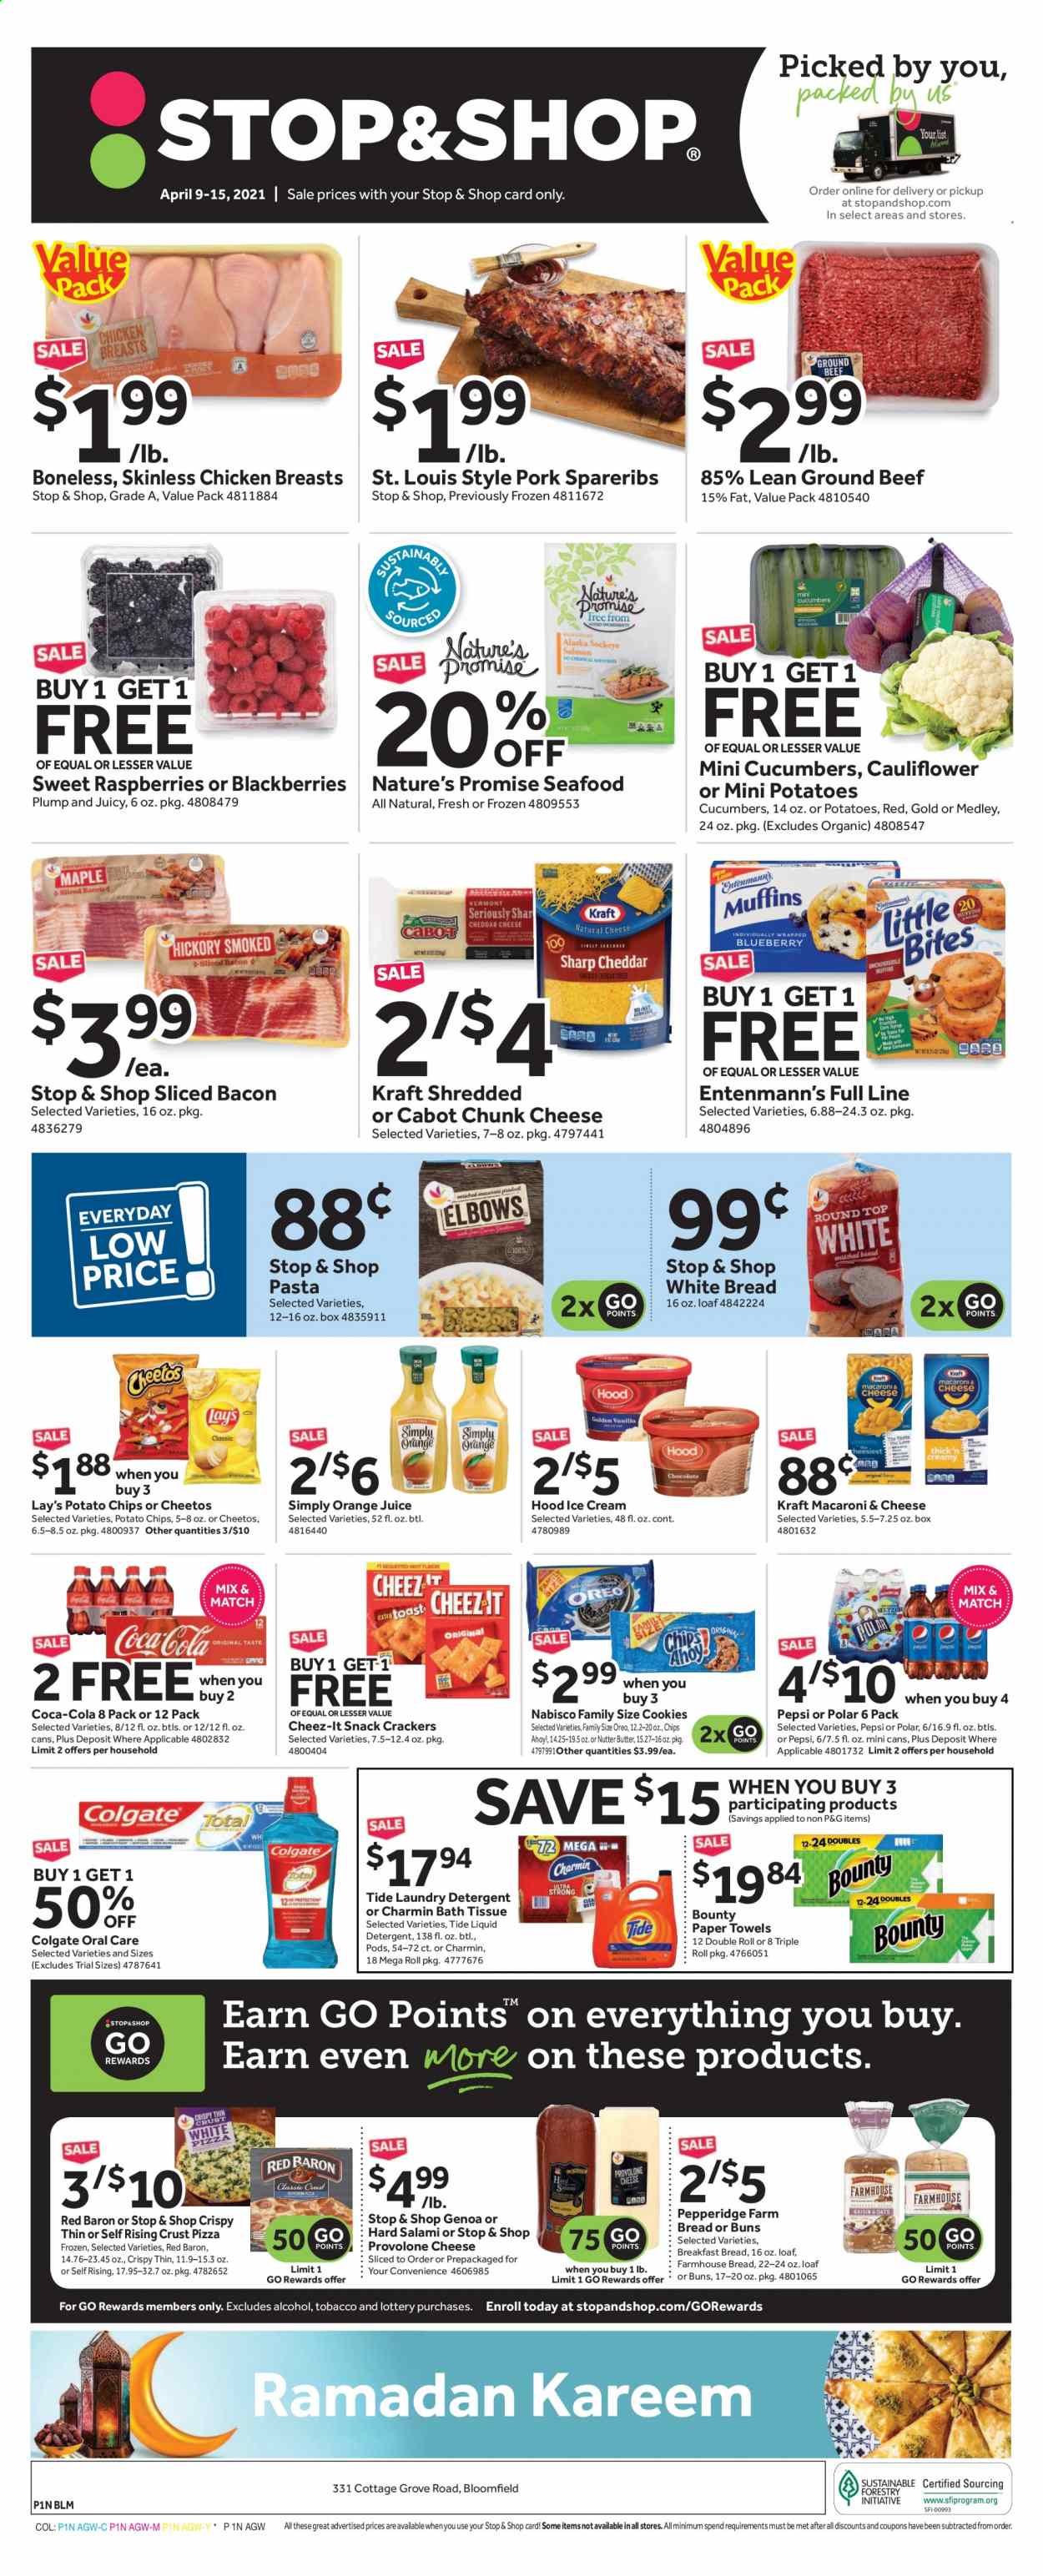 thumbnail - Stop & Shop Flyer - 04/09/2021 - 04/15/2021 - Sales products - white bread, buns, Nature’s Promise, muffin, Entenmann's, cauliflower, blackberries, raspberries, chicken breasts, beef meat, ground beef, pork spare ribs, seafood, macaroni & cheese, pizza, Kraft®, bacon, salami, chunk cheese, Provolone, Oreo, ice cream, Red Baron, cookies, snack, Bounty, crackers, Little Bites, potato chips, Cheetos, Lay’s, Cheez-It, pasta, Coca-Cola, Pepsi, orange juice, juice, bath tissue, kitchen towels, paper towels, Charmin, Tide, laundry detergent, liquid detergent, Colgate, Sharp, pin. Page 1.